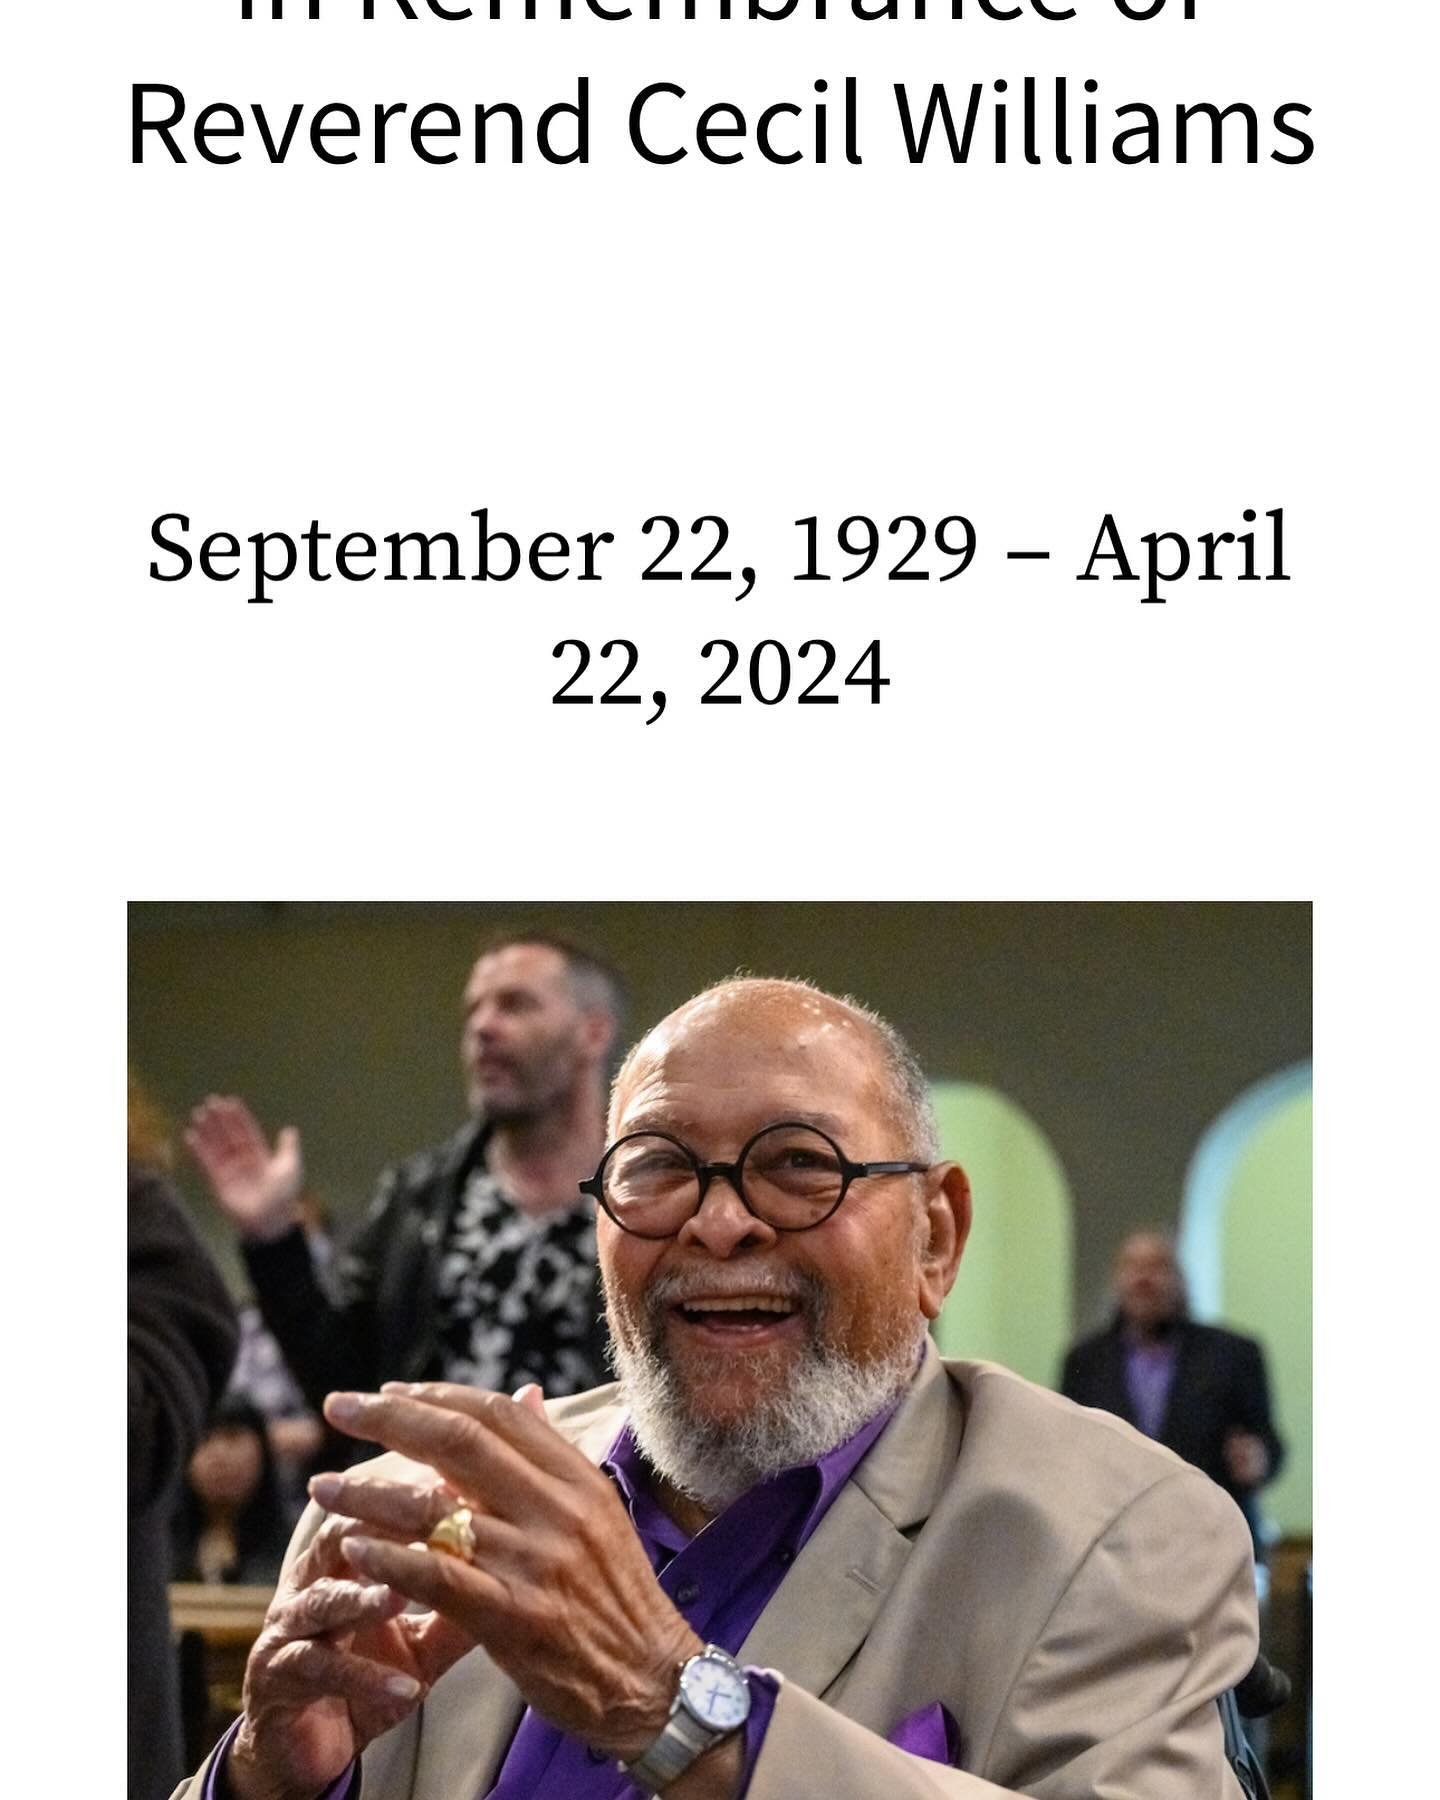 San Francisco has lost the legendary Reverend Cecil Williams, of Glide Memorial Church. Reverend Williams gets a strong mention in our play. He accommodated Vanguard Youth organization with an office and a printer at Glide Church. Cecil Williams is q